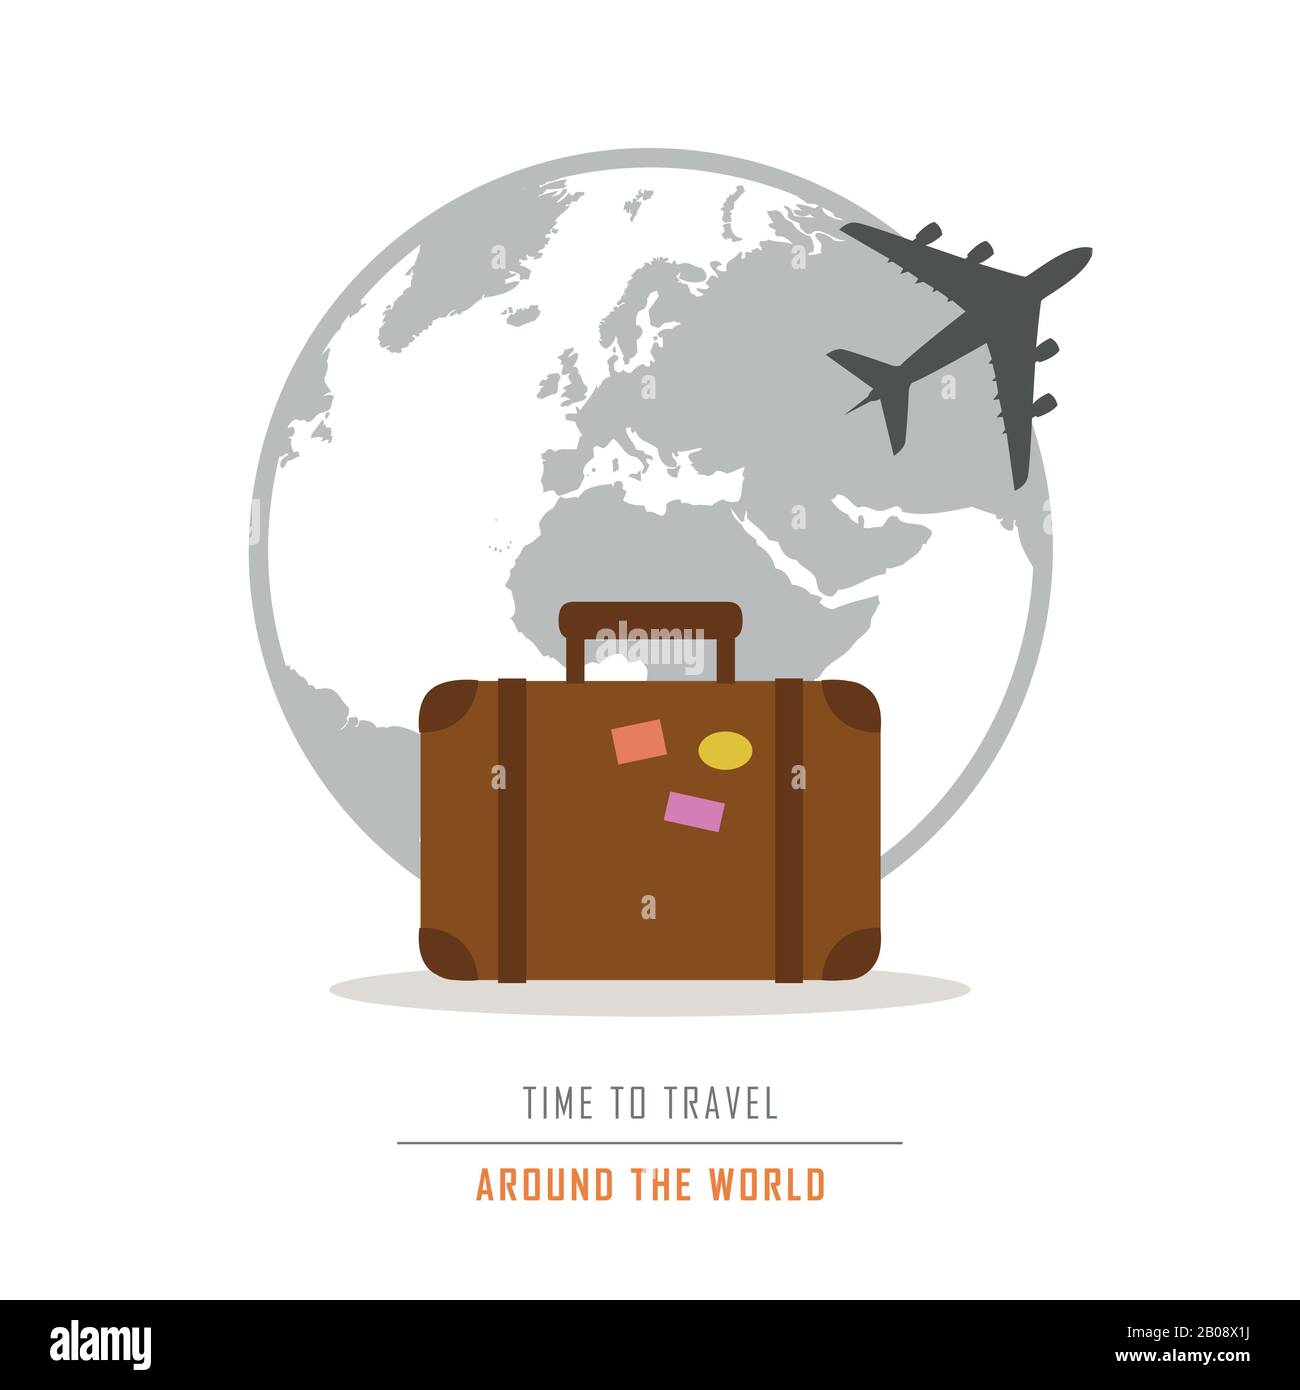 time to travel around the world with suitcase and plane vector illustration EPS10 Stock Vector